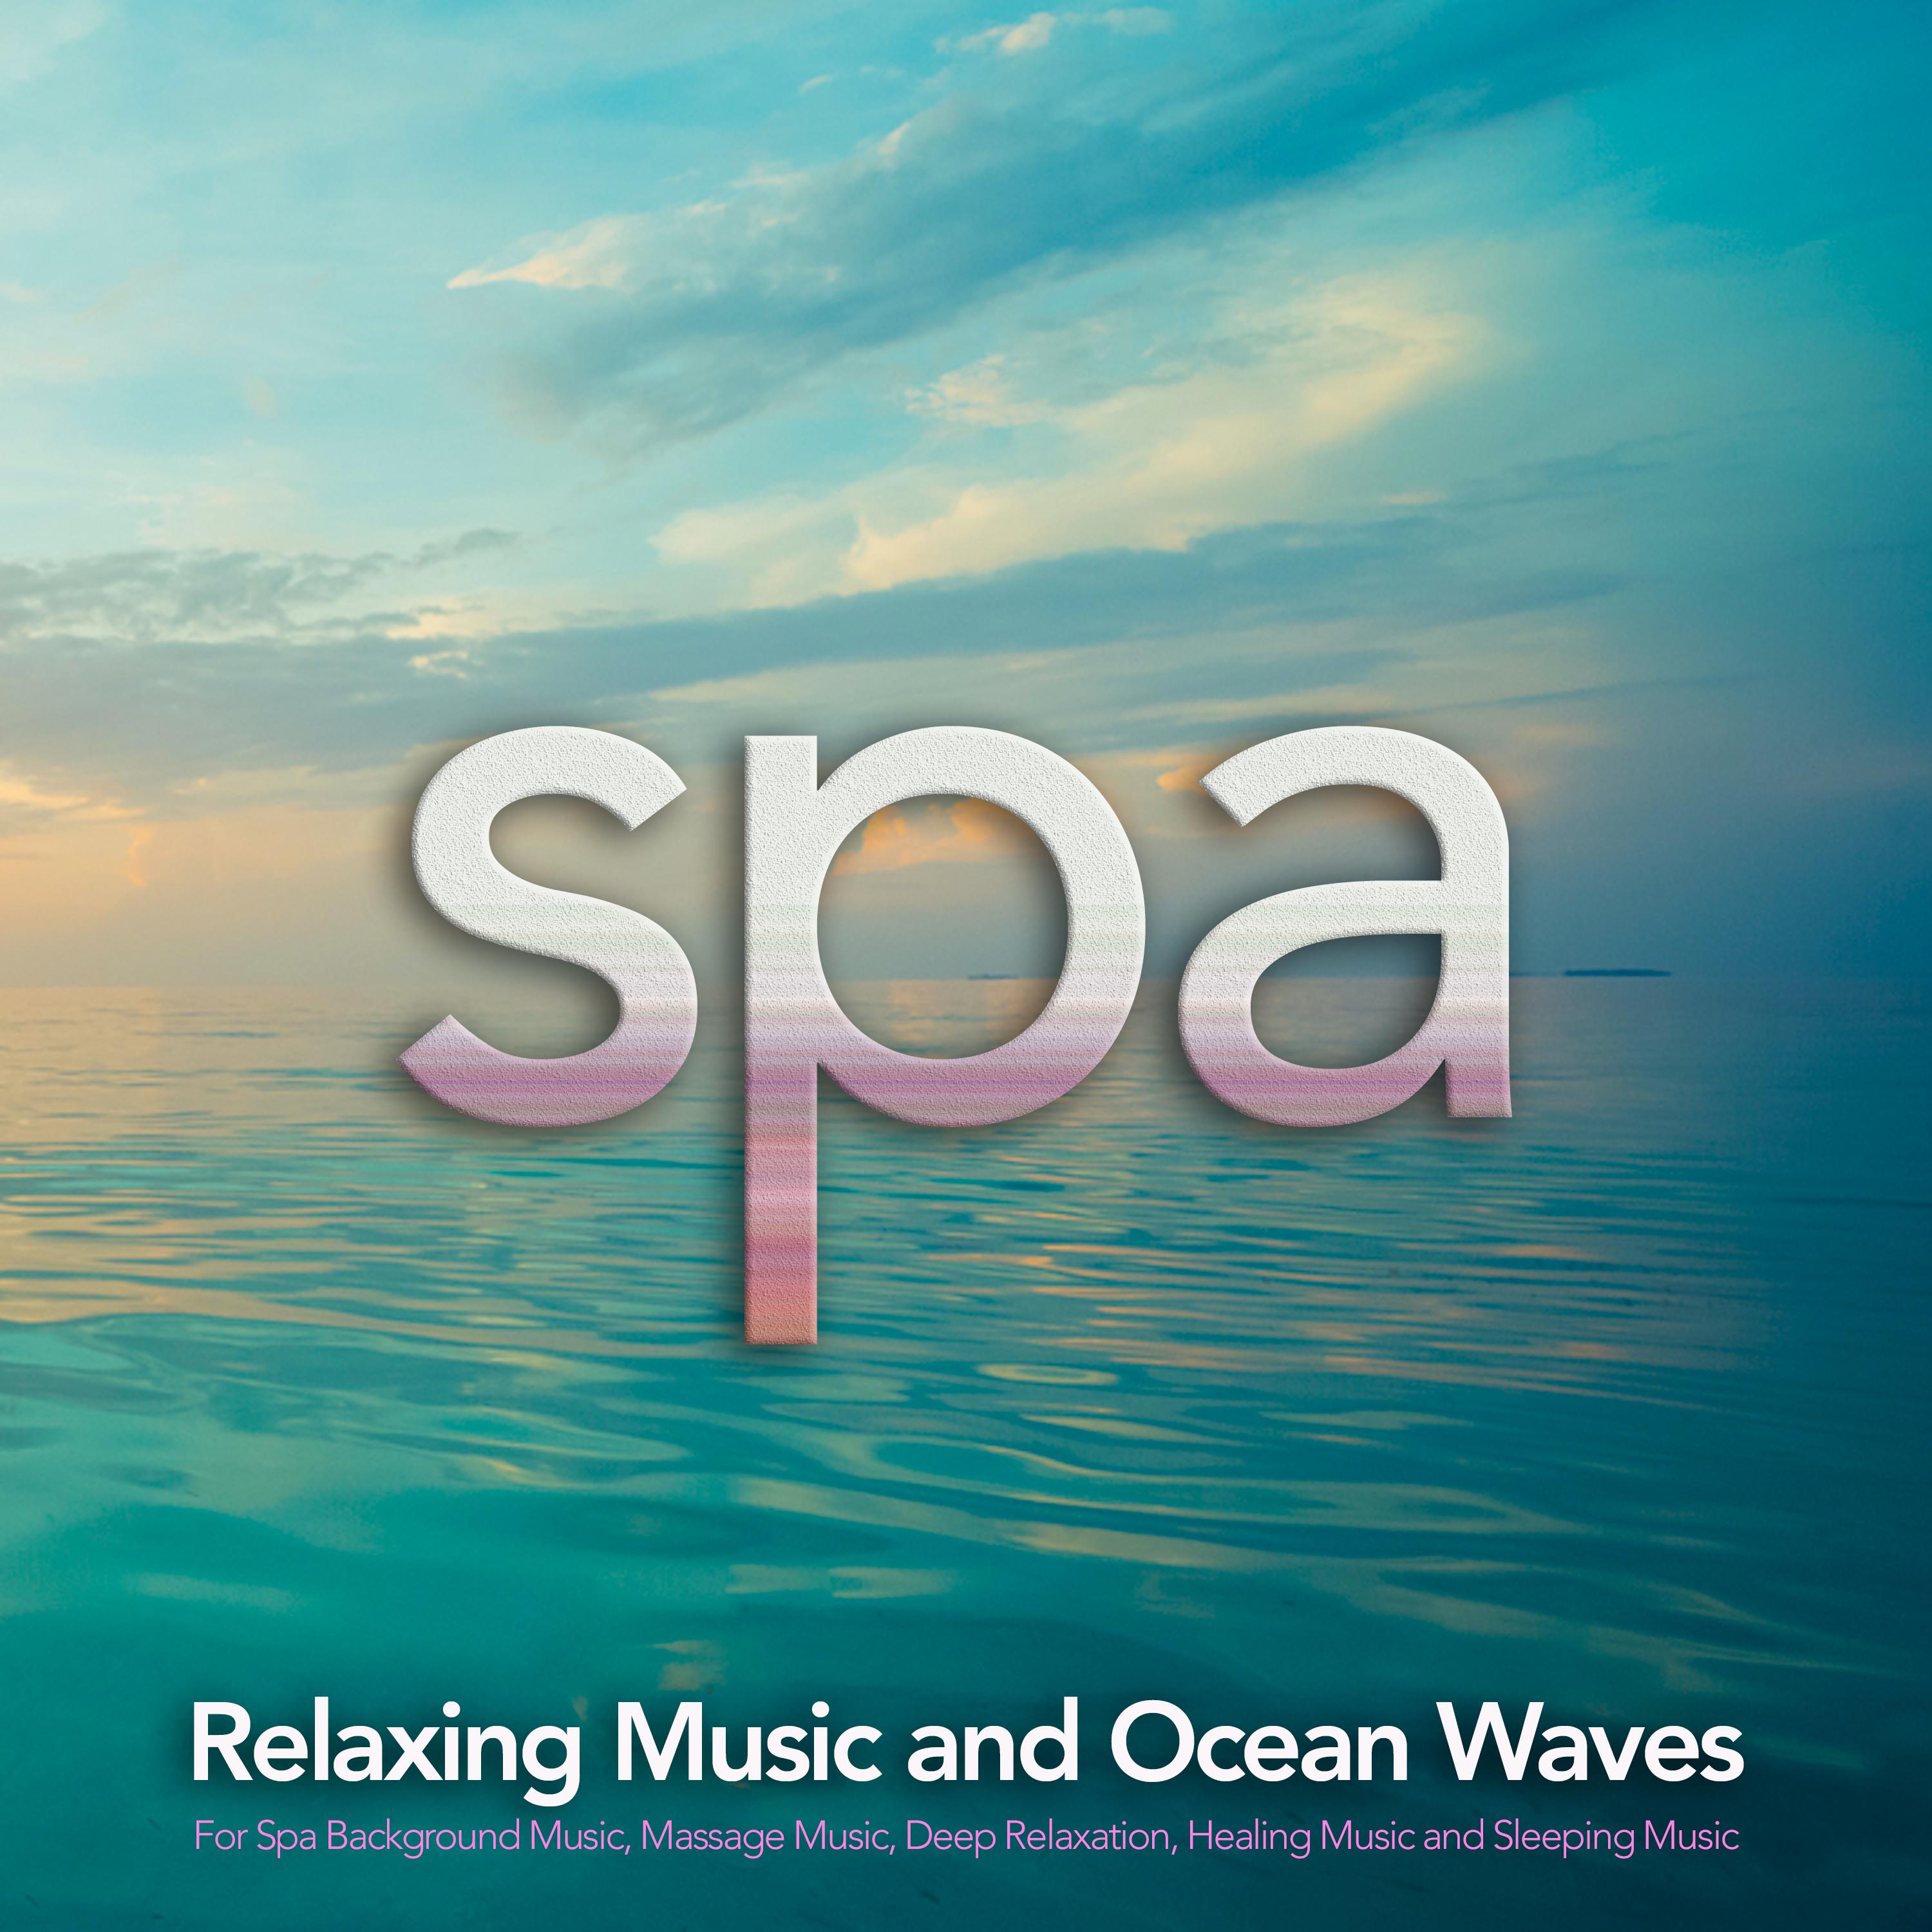 Massage Music and Ocean Waves